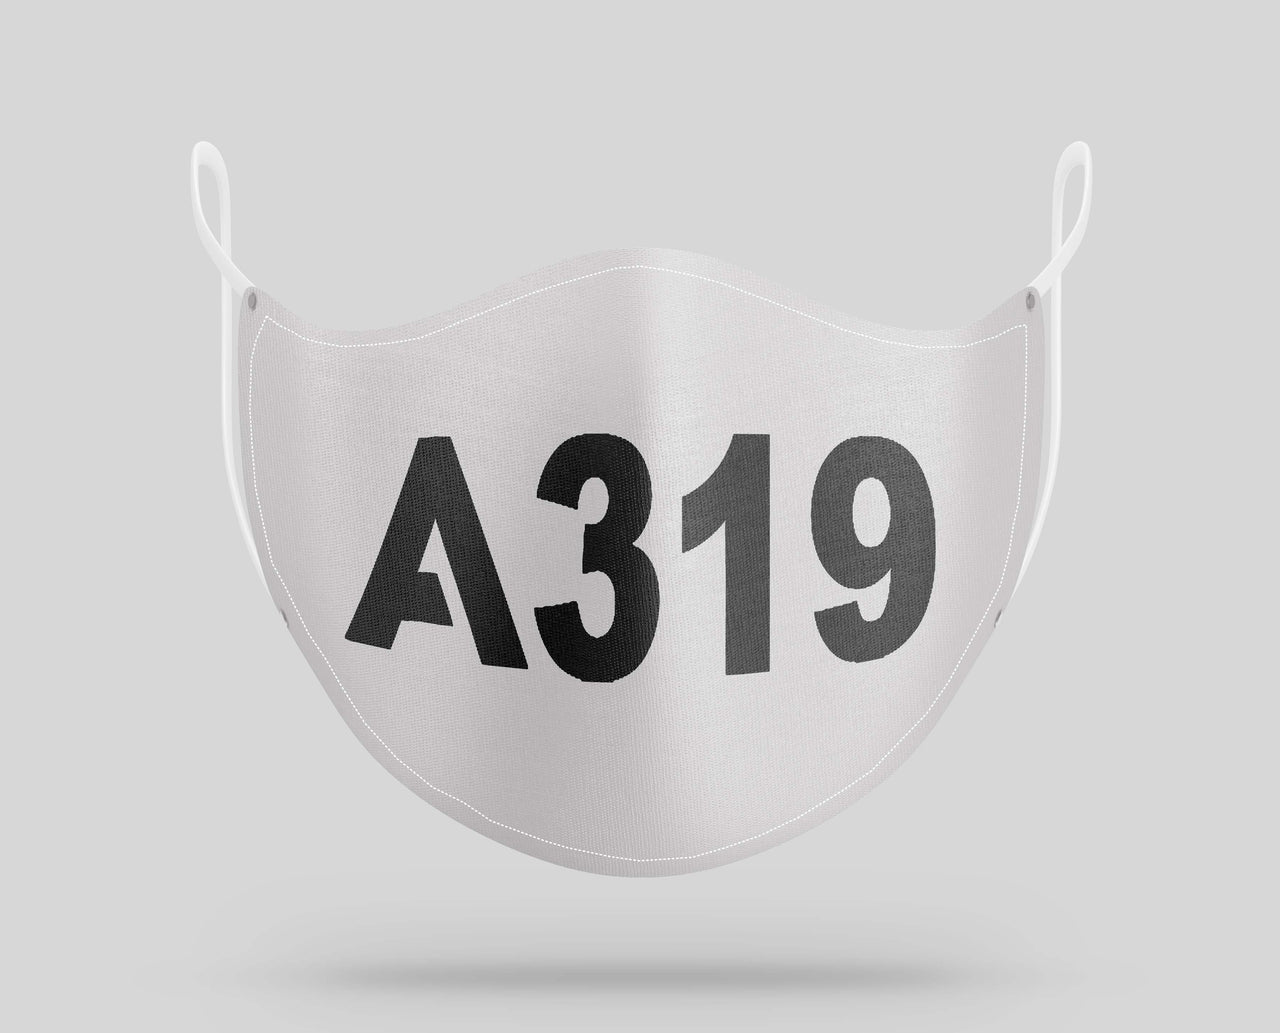 Airbus A319 Text Designed Face Masks